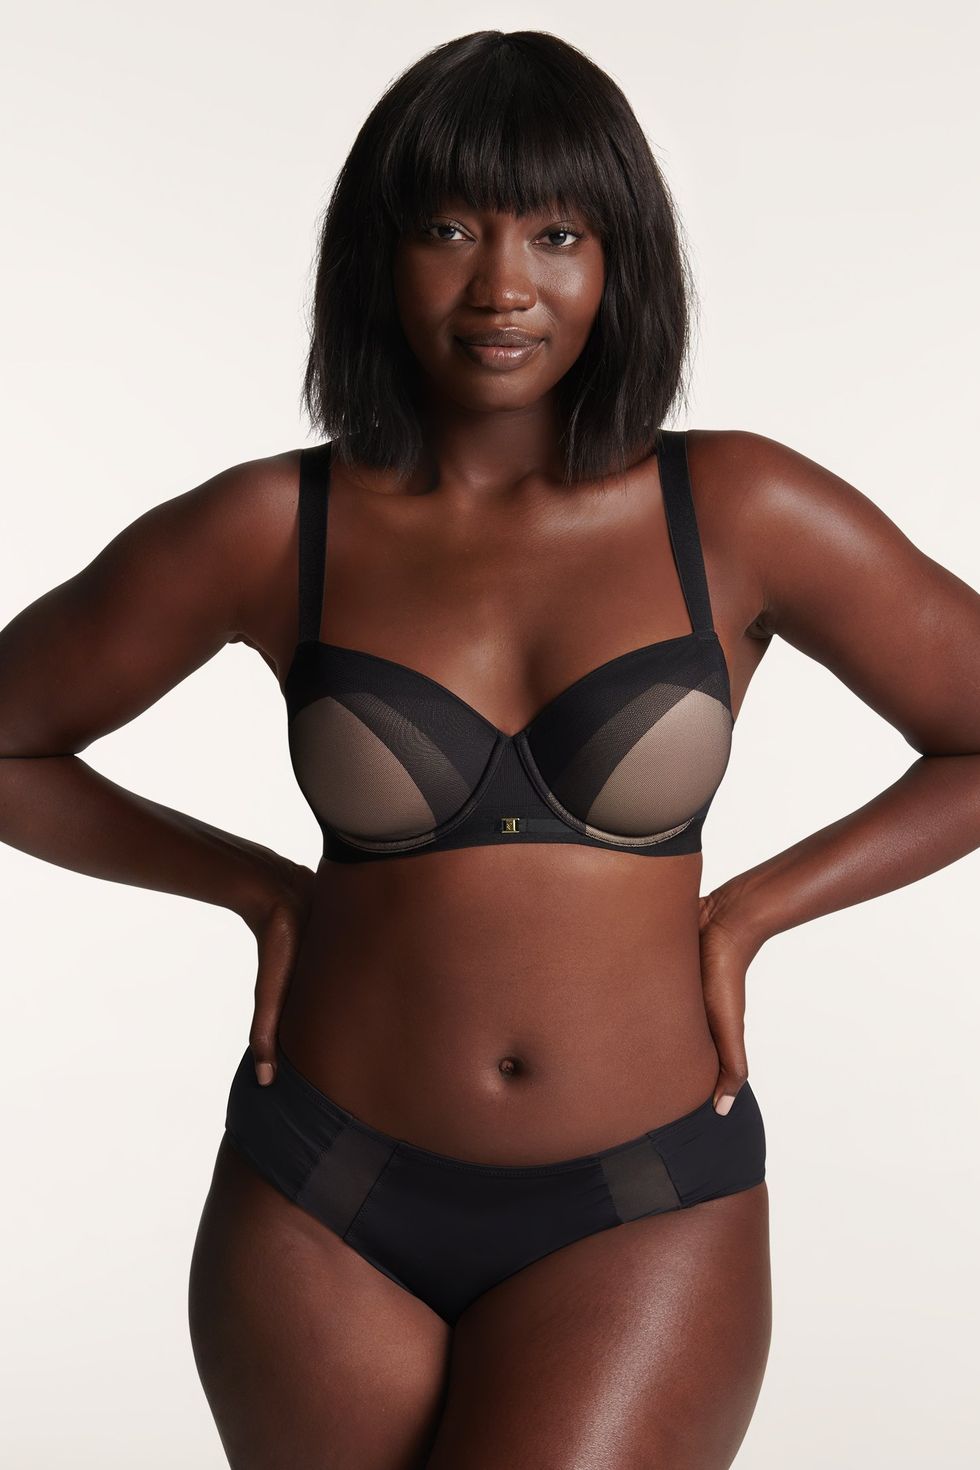 ThirdLove Ombre Mesh Demi Bra  ThirdLove Will Help You Find Your